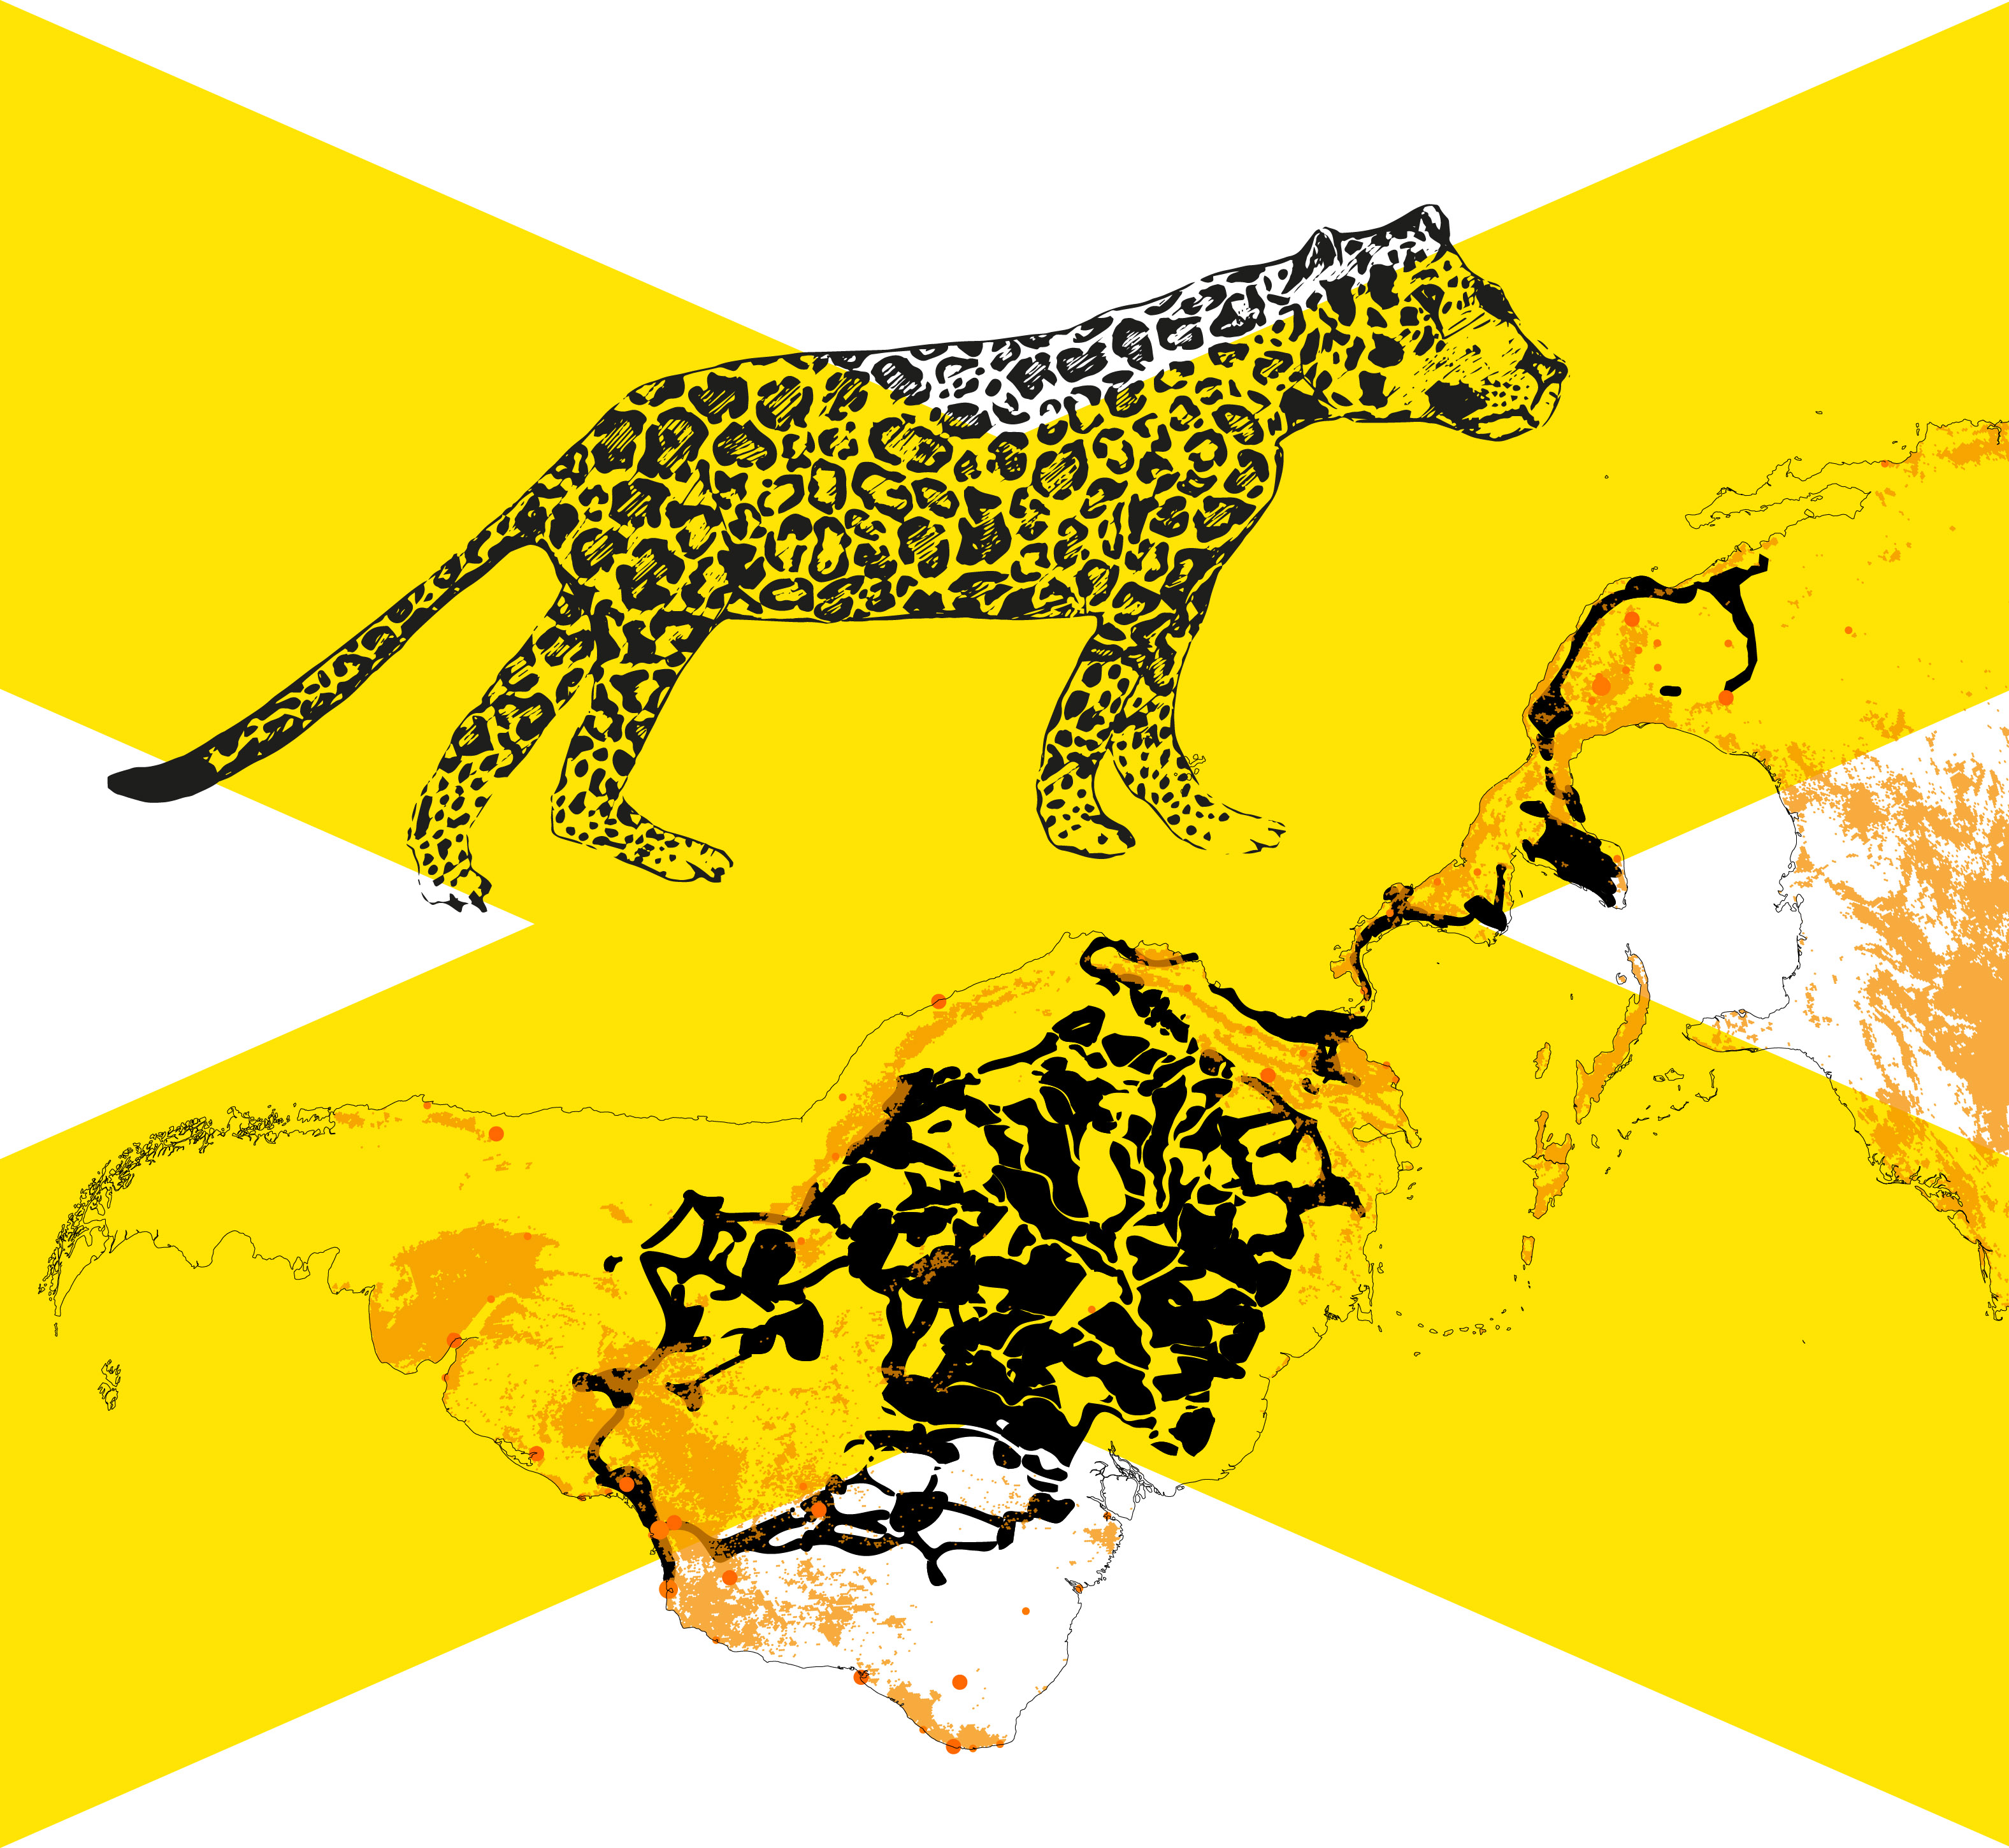 Black and white graphic illustrating Salcedo's Cartographies of Interconnection with a jaguar and a yellow x overlaid